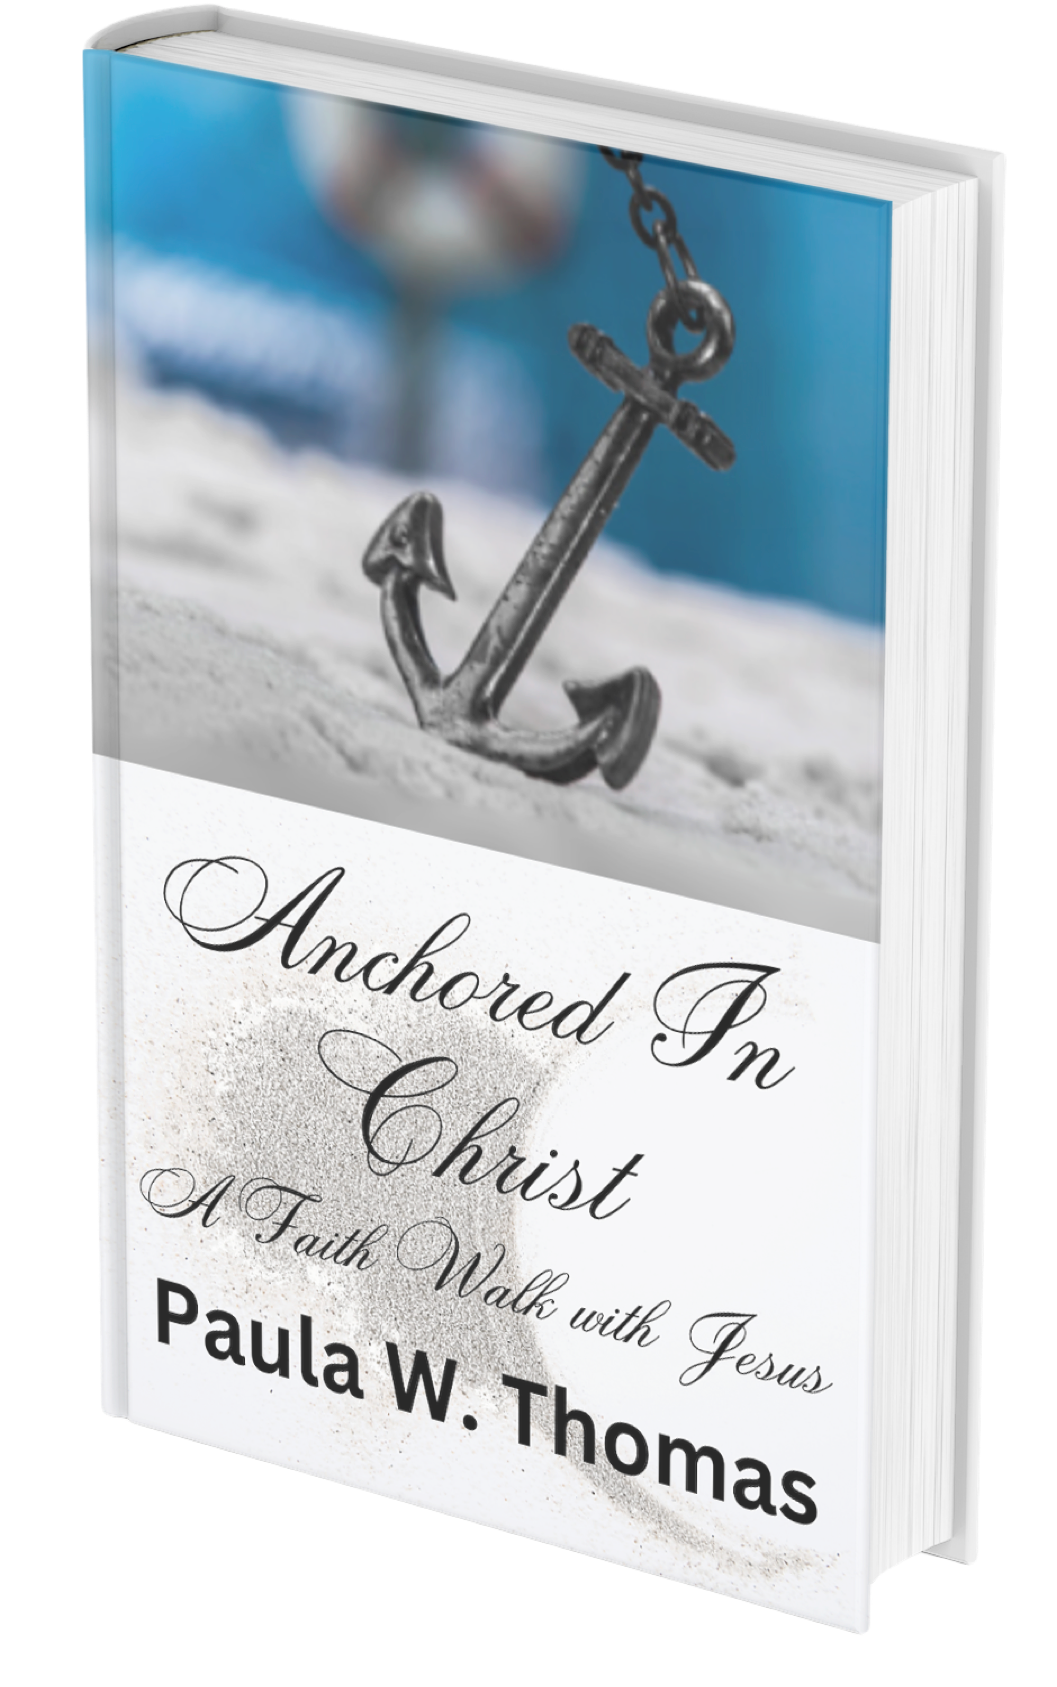 NEW BOOK RELEASE. ANCHORED IN CHRIST, A FAITH WALK WITH…, by David Thomas, Anchored In Christ, Feb, 2024